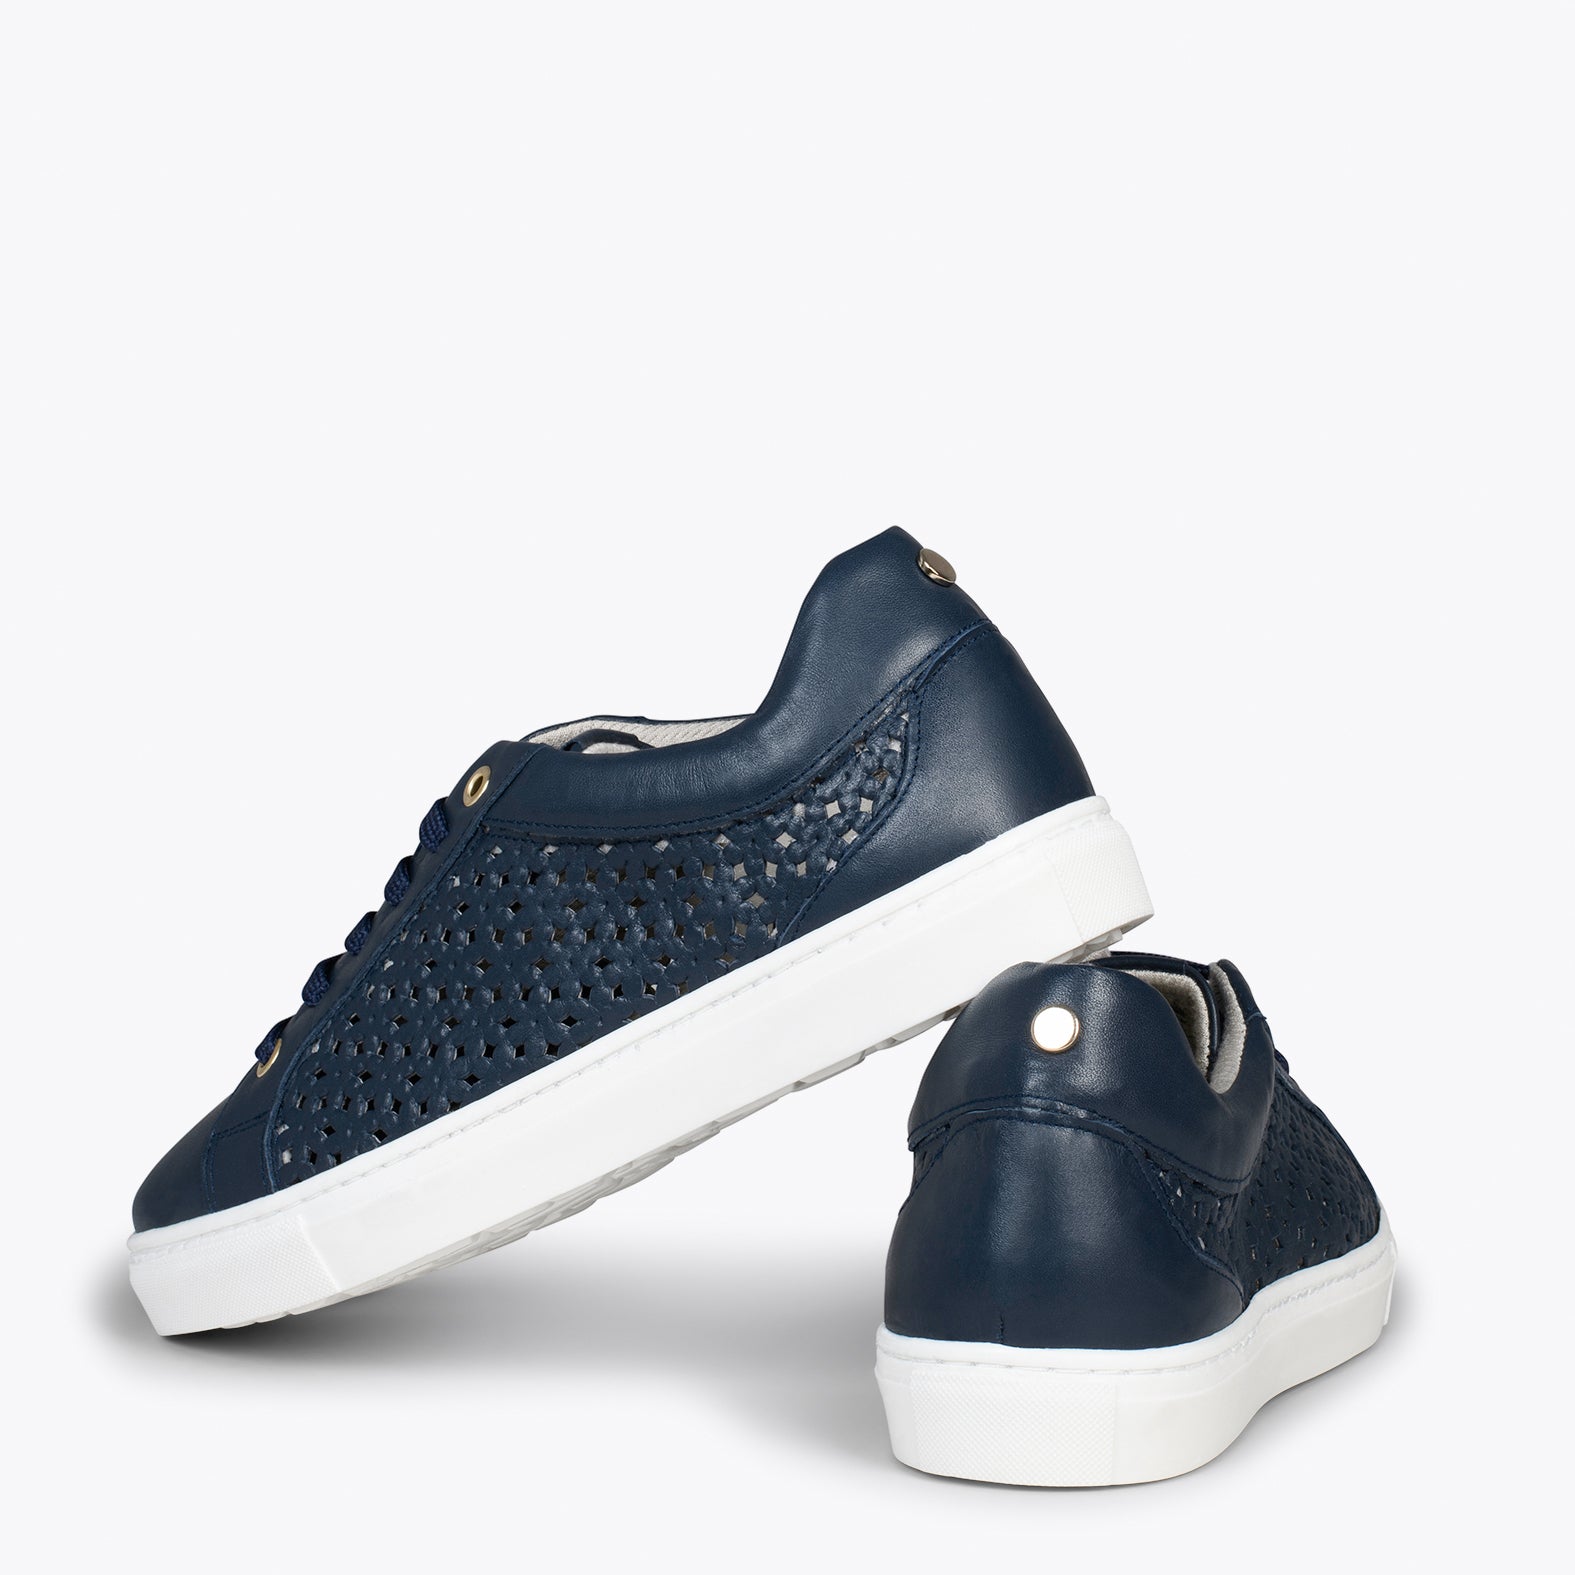 BREATHE – NAVY nappa sneakers with dye-cutting design